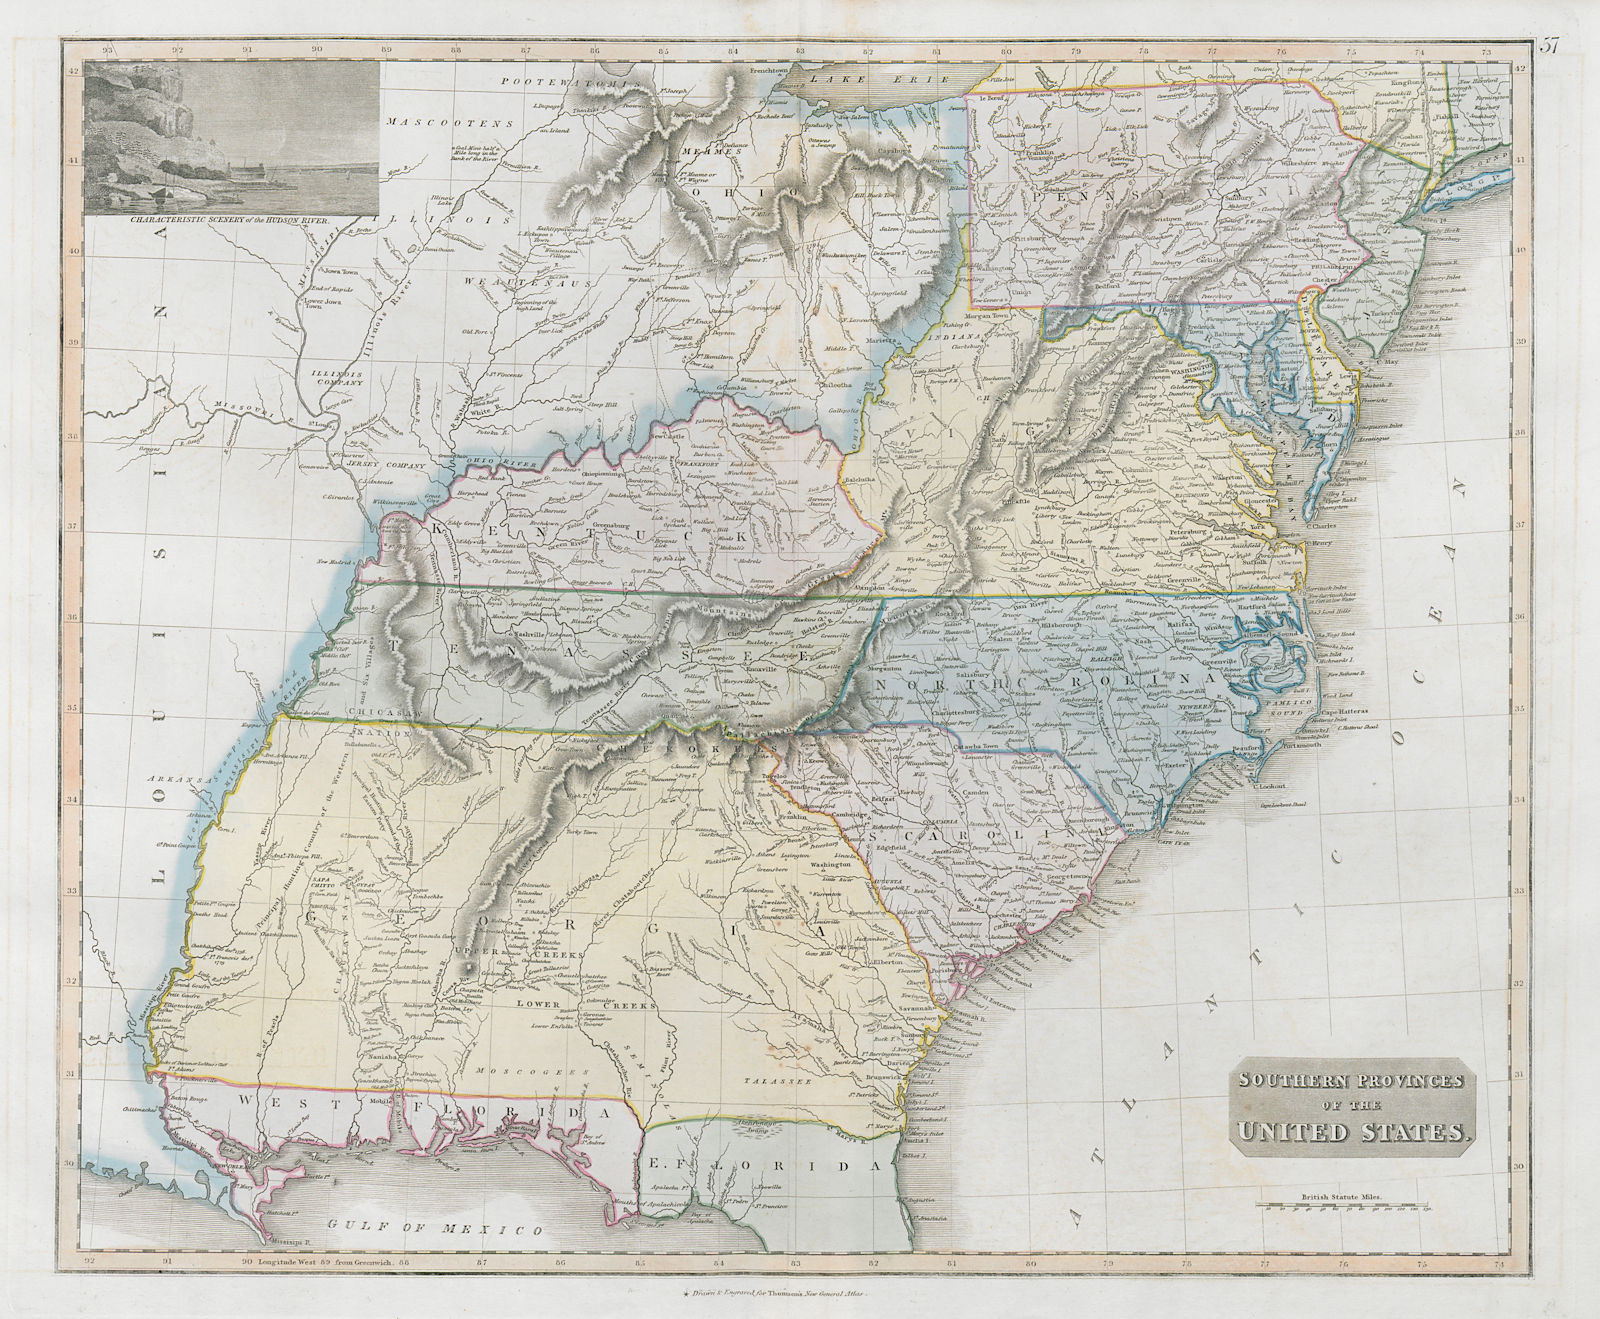 "Southern provinces of the United States". THOMSON. West & East Florida 1830 map